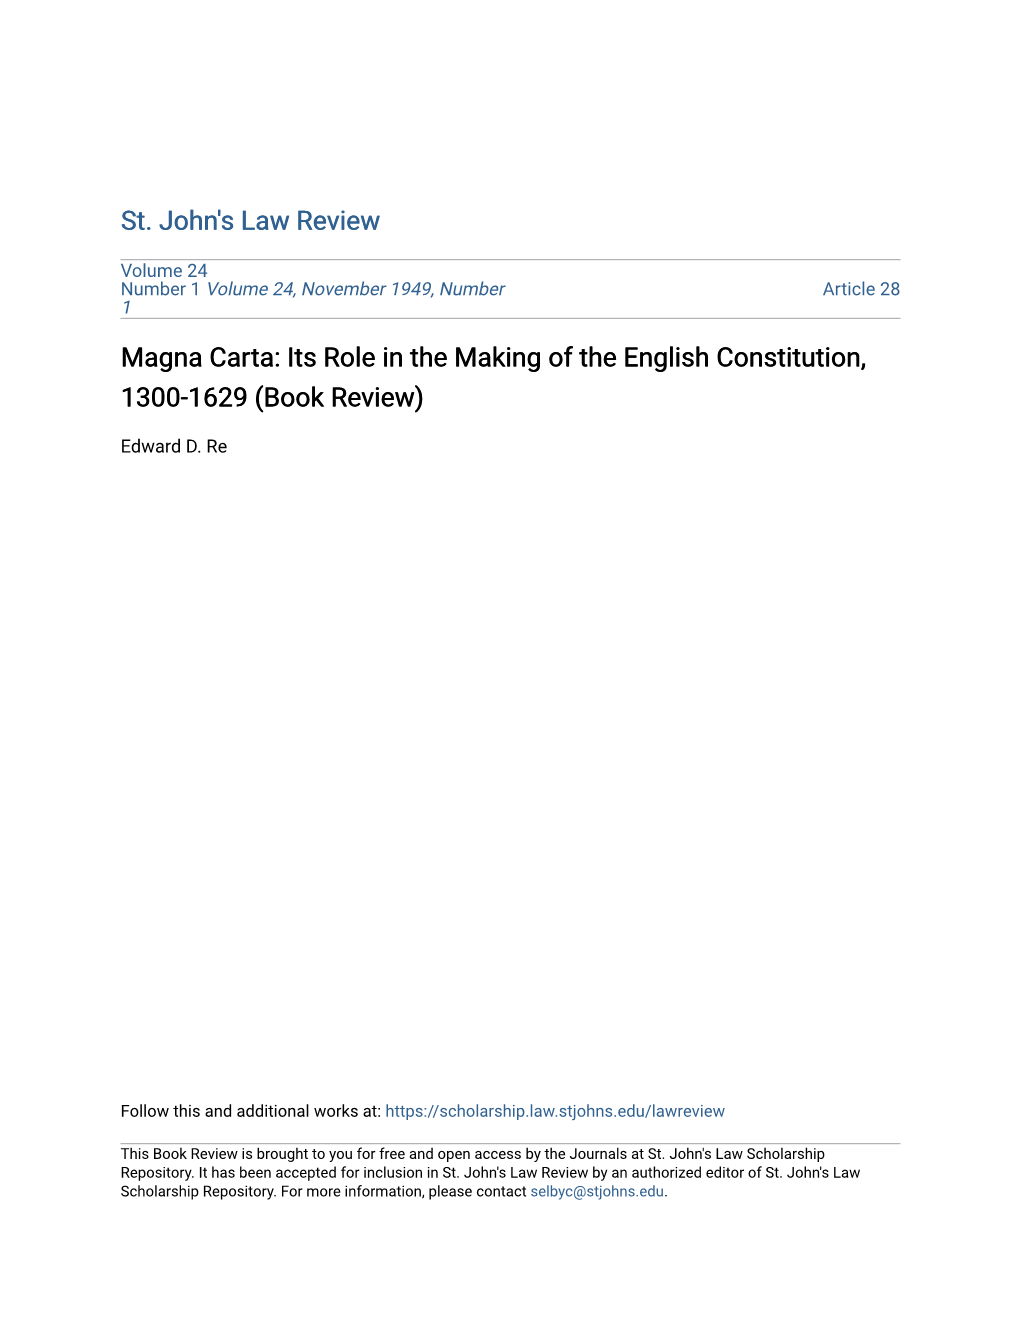 Magna Carta: Its Role in the Making of the English Constitution, 1300-1629 (Book Review)